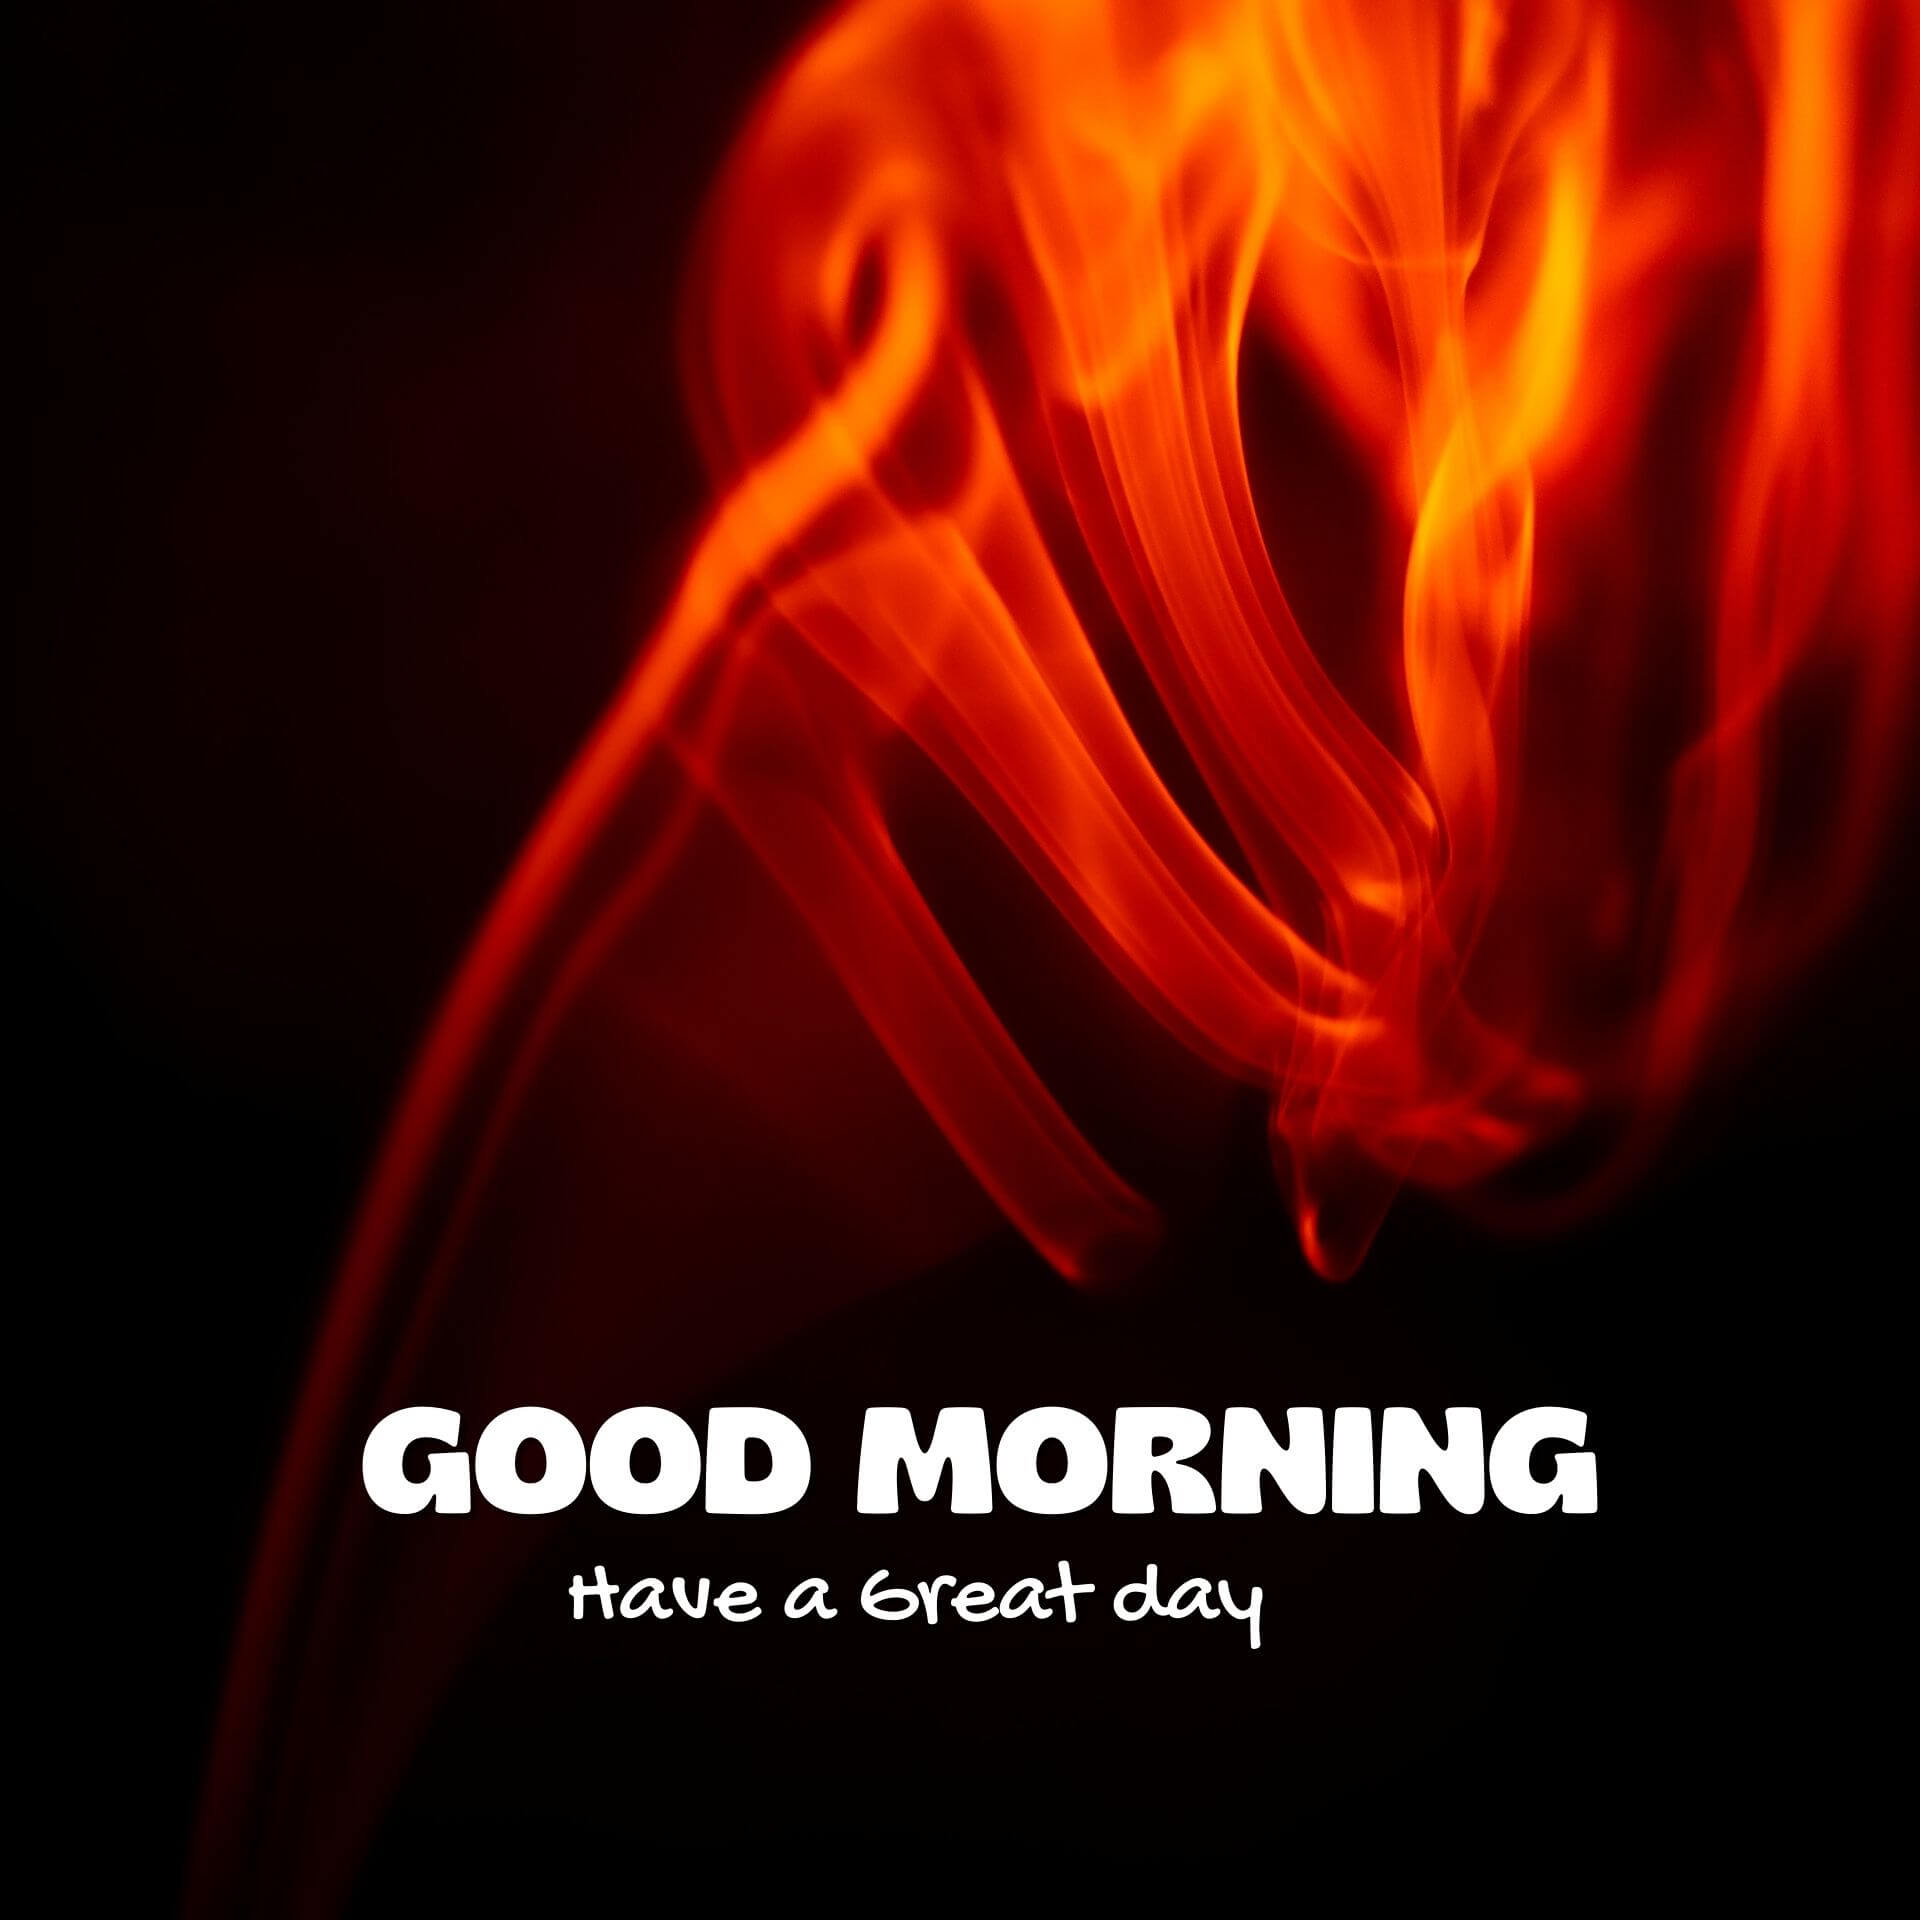 Good morning have a nice day Wallpaper Download for Facebook